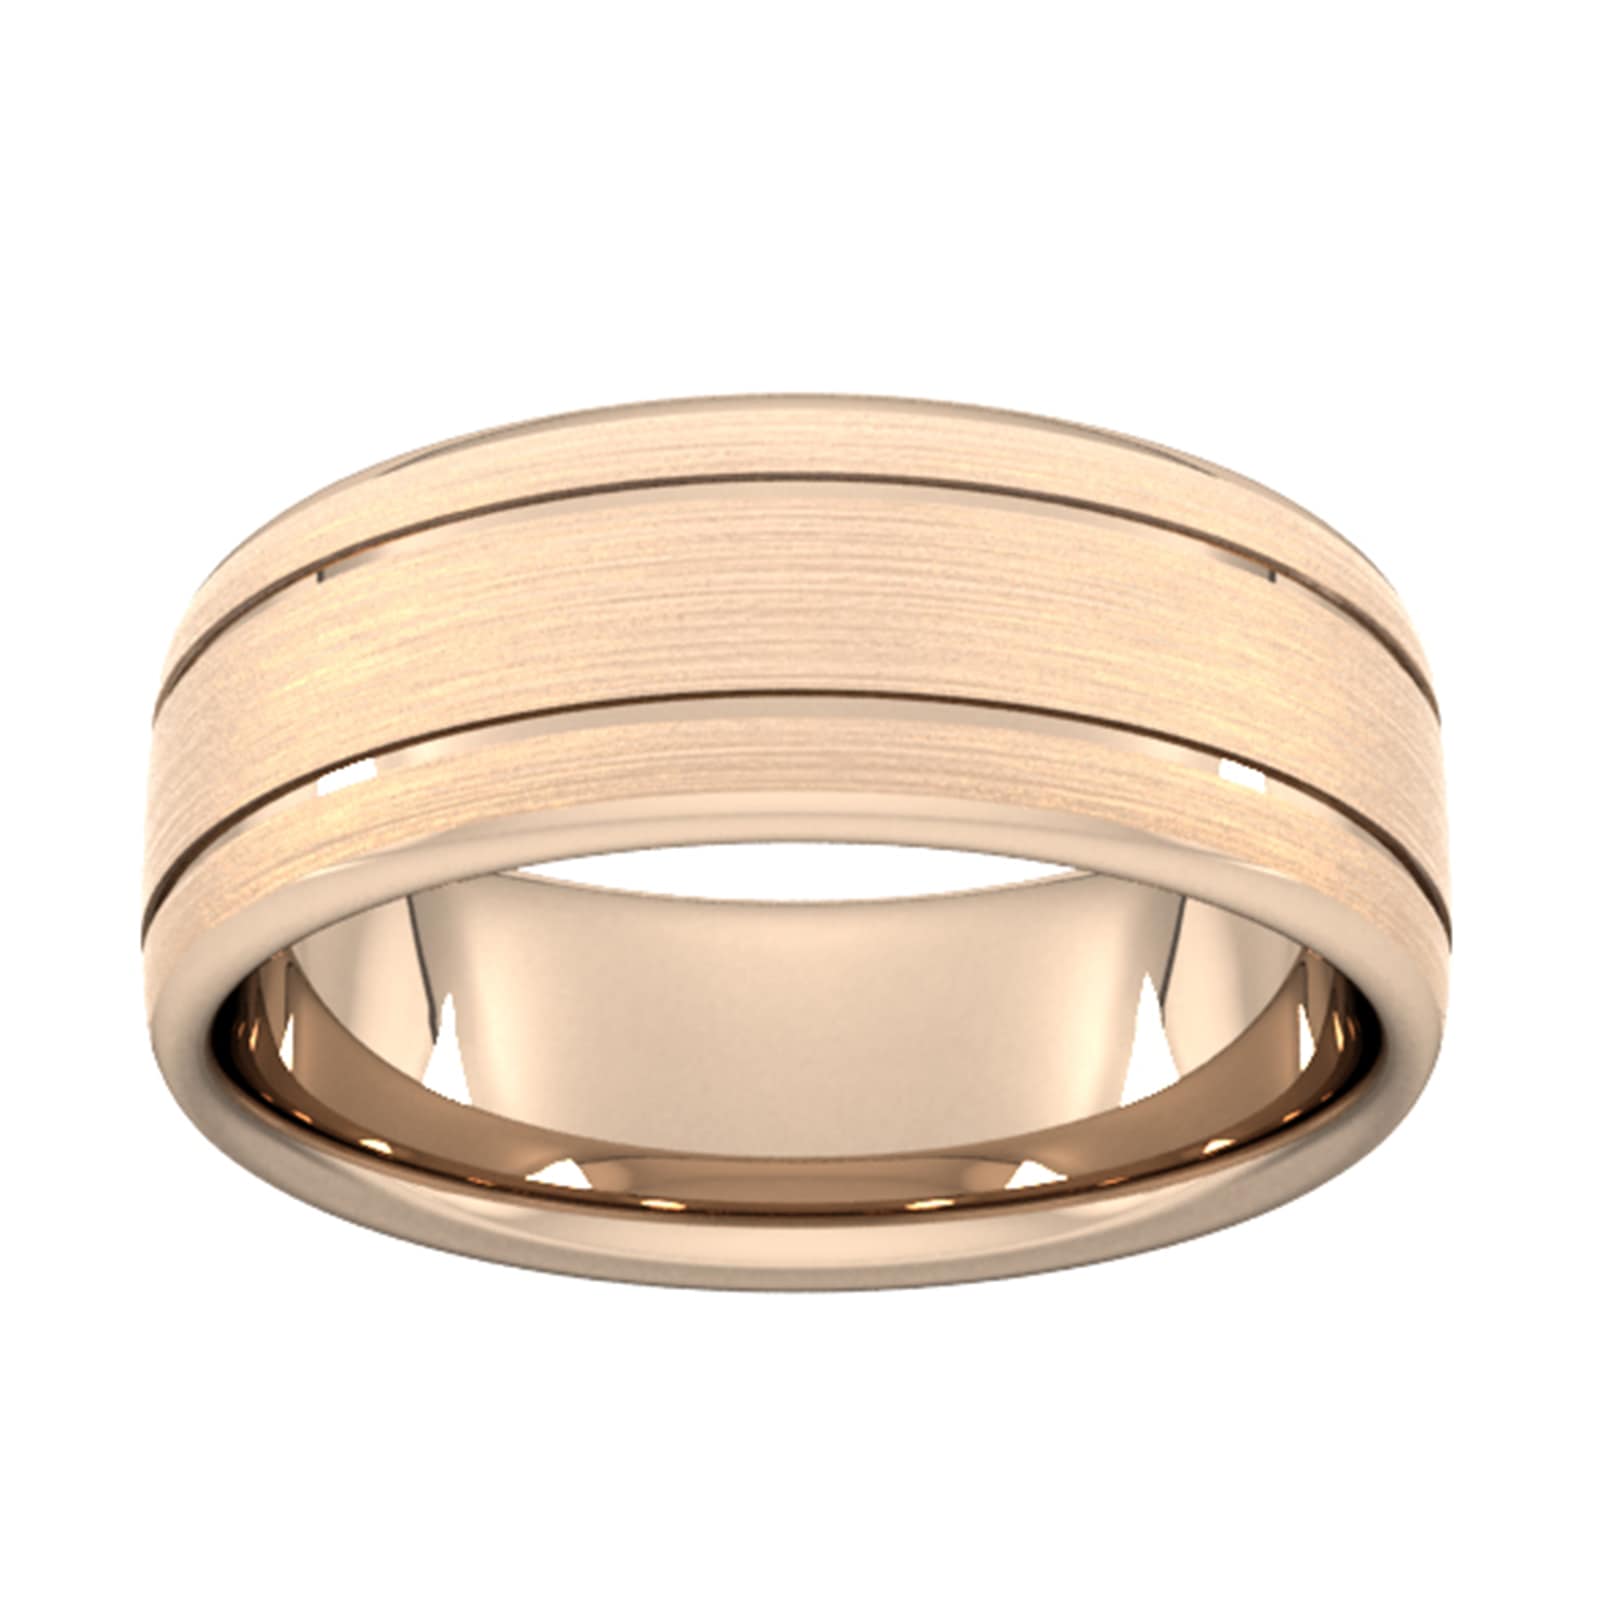 8mm D Shape Heavy Matt Finish With Double Grooves Wedding Ring In 9 Carat Rose Gold - Ring Size Q